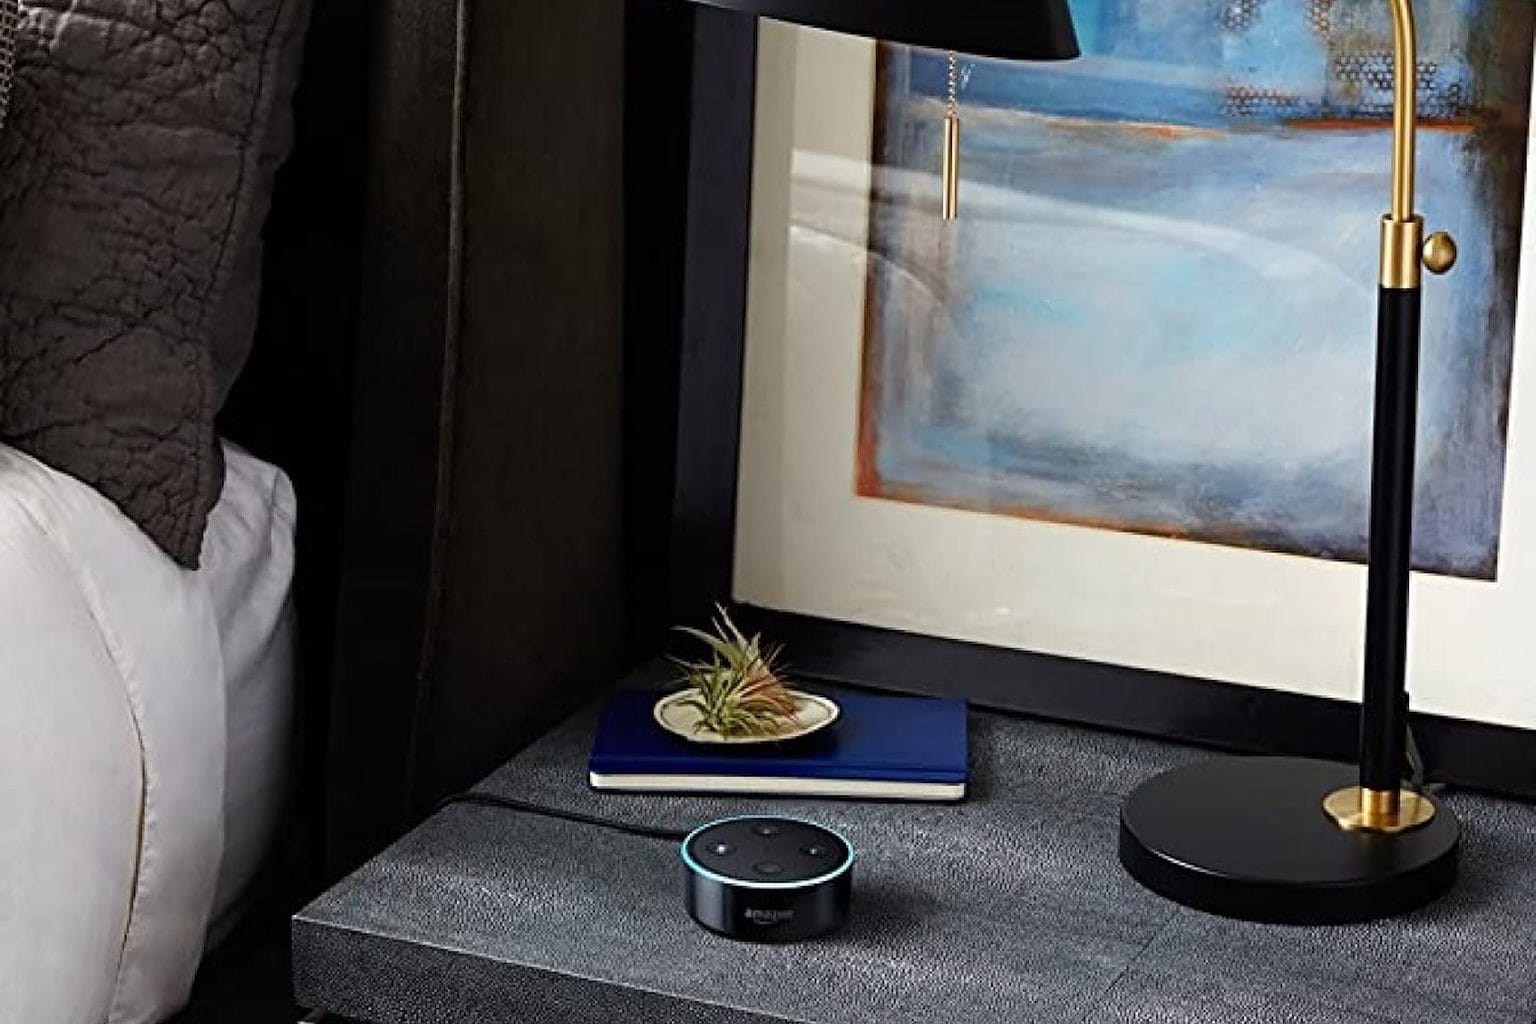 The clock is ticking for 62% off this refurbished Amazon Echo Dot.